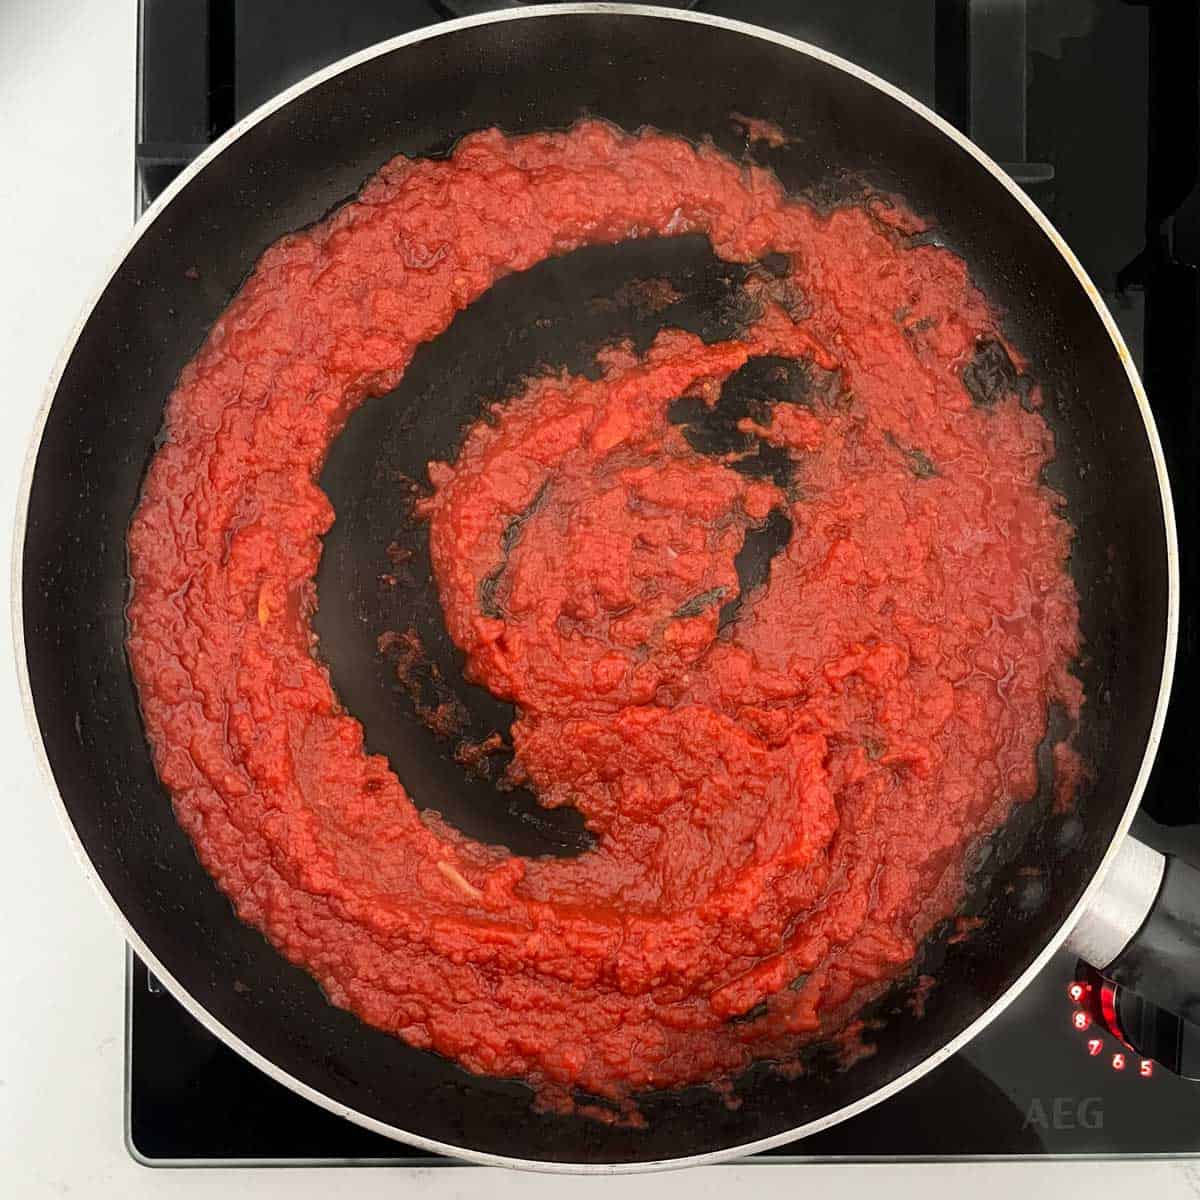 The cooked sauce for pasta alla sorrentina in a black frying pan.